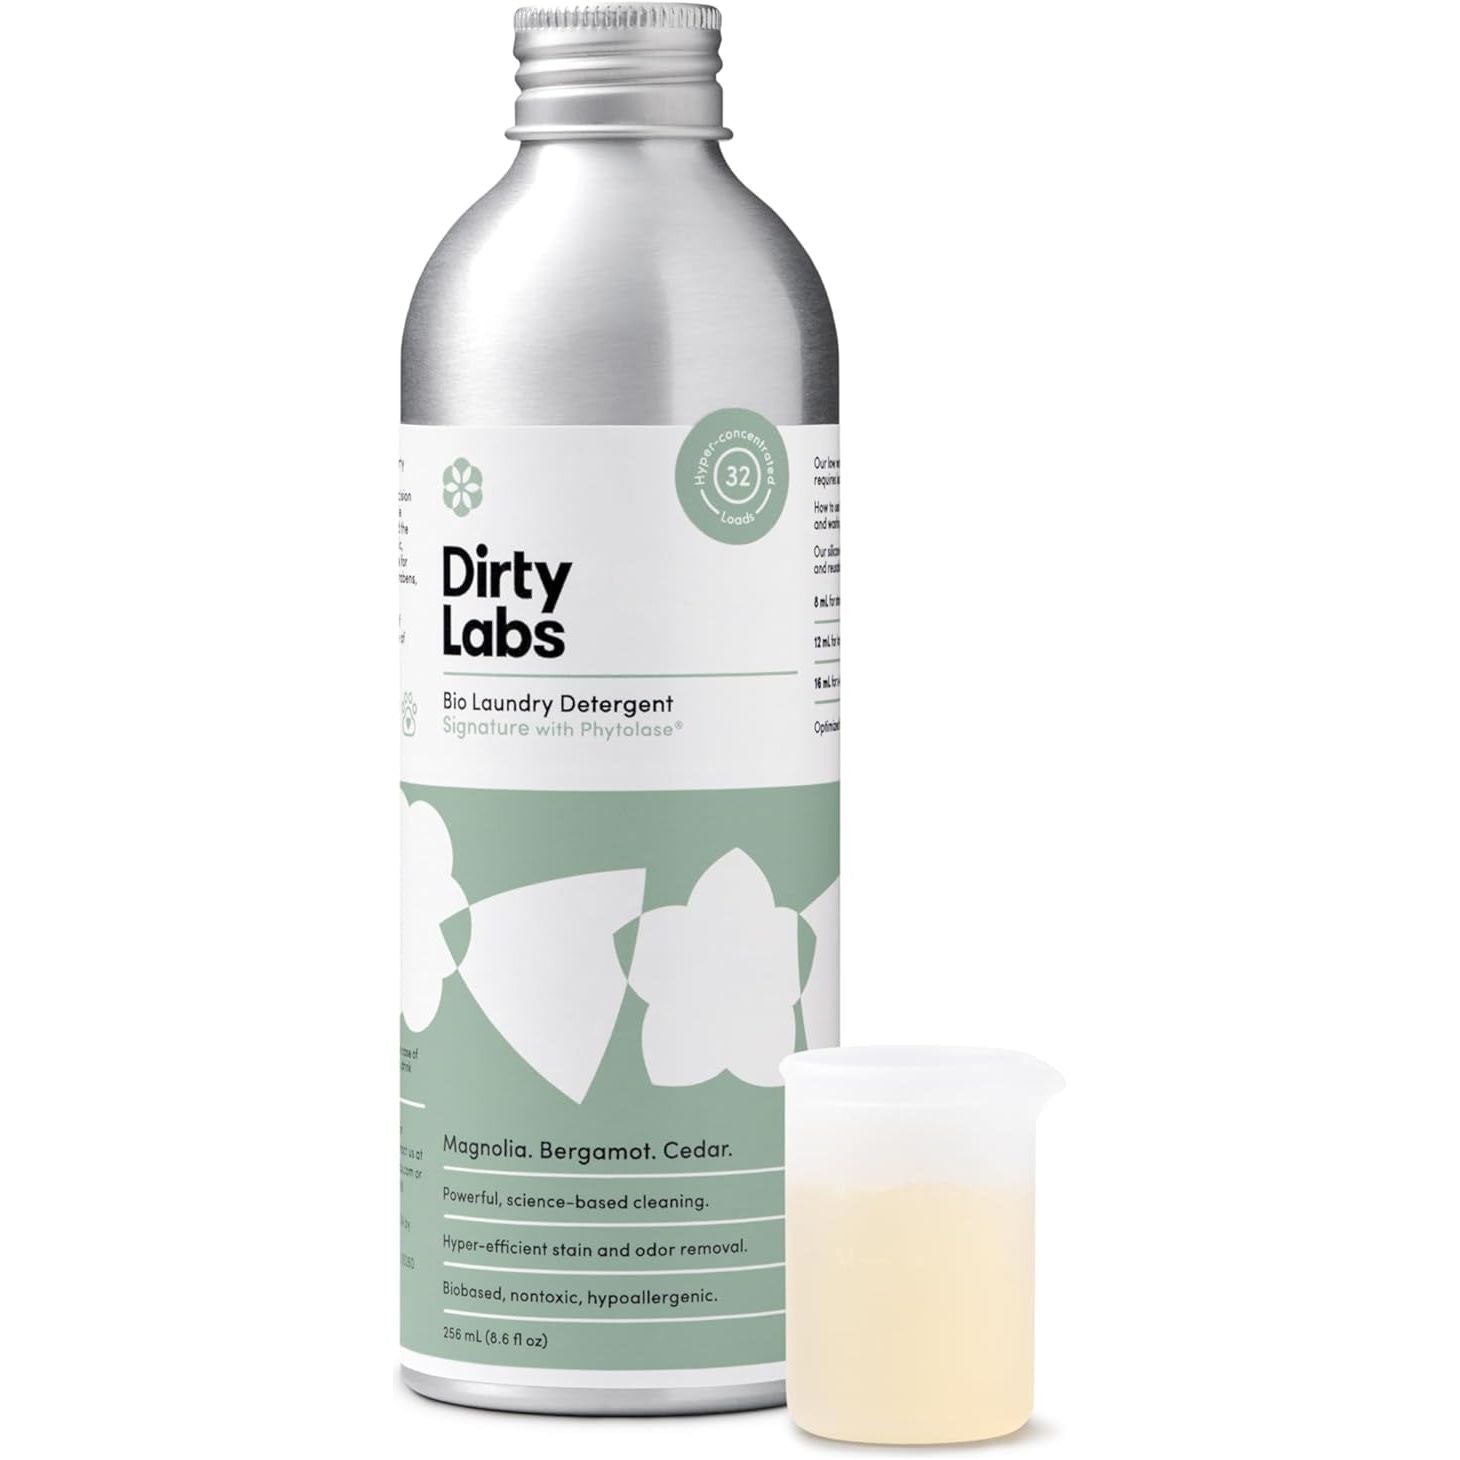 Dirty Labs | Signature Scent | Bio-Liquid Laundry Detergent | 32 Loads (8.6 fl oz) | Hyper-Concentrated | High Efficiency & Standard Machine Washing | Nontoxic, Biodegradable | Stain & Odor Removal